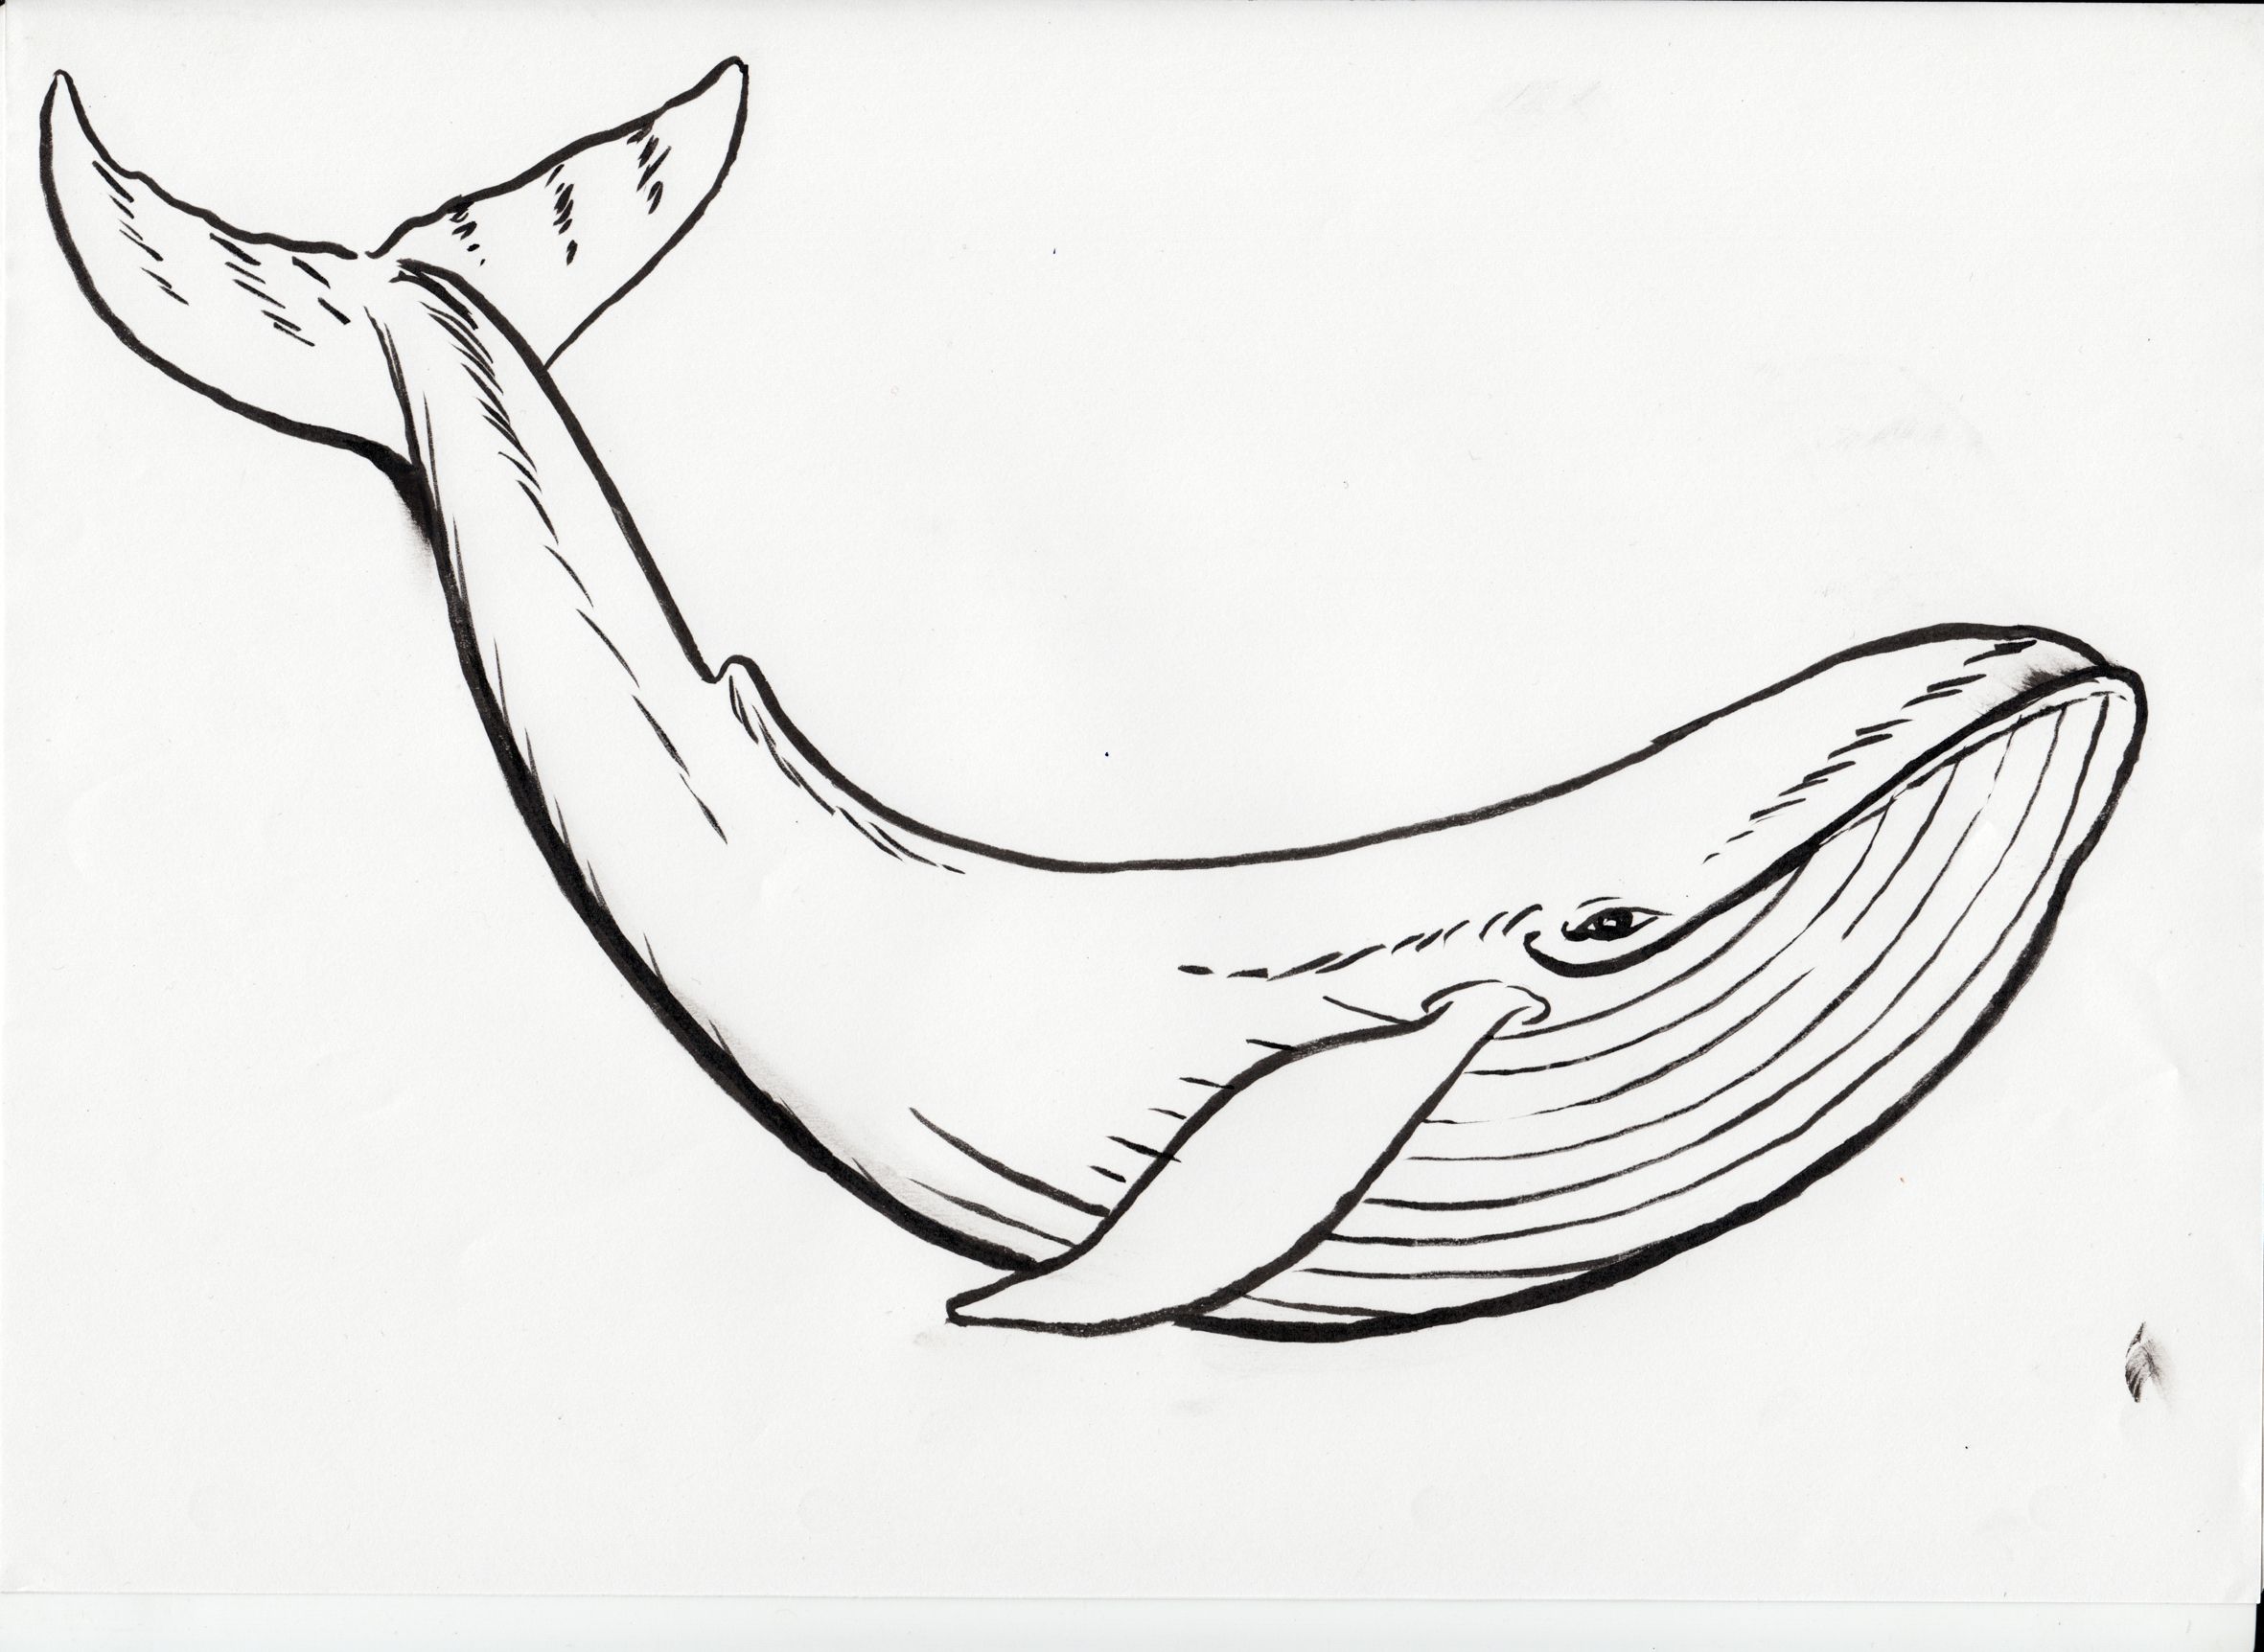 Printable Whale Coloring Pages The Hollywood Smile Of A Big Mammal.